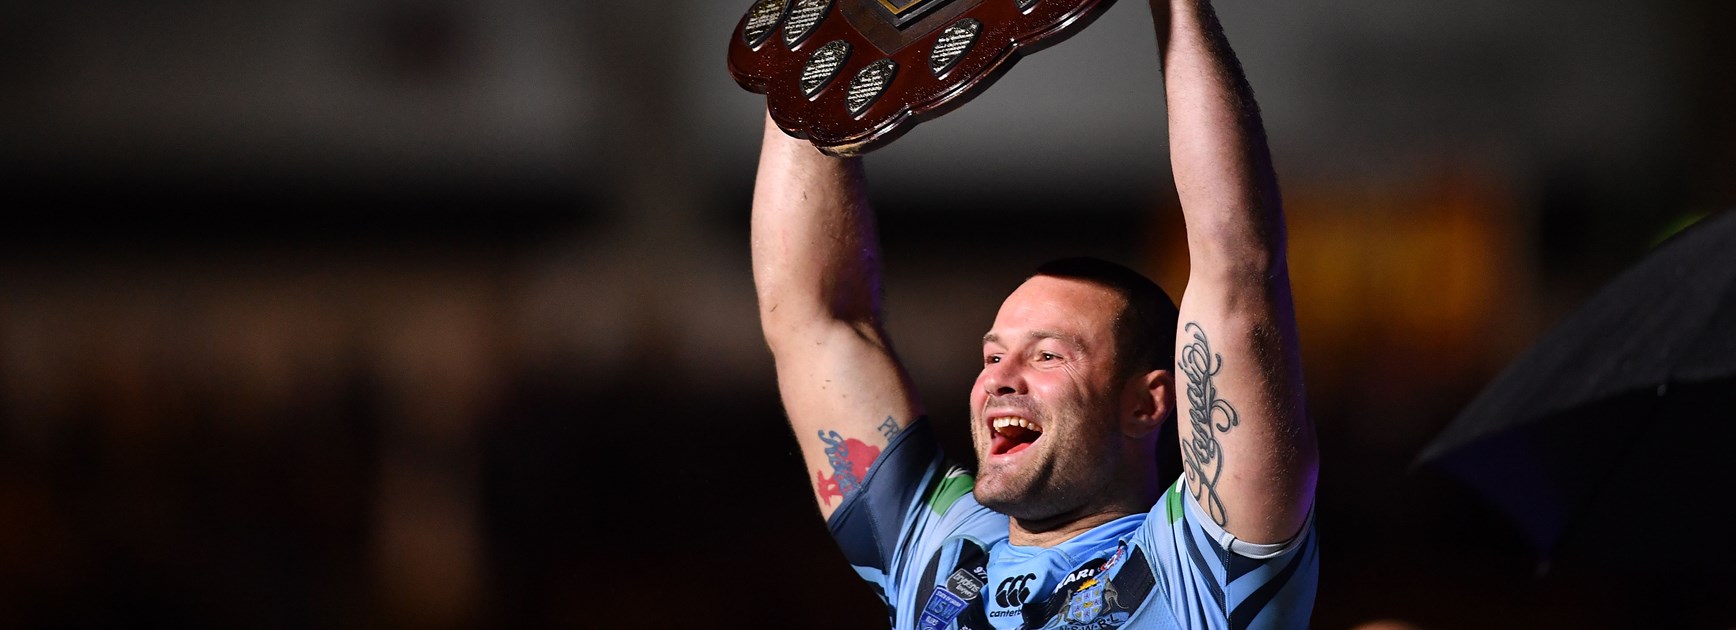 Boyd Cordner captained NSW to back-to-back series wins for the first time in 14 years in 2018/19.